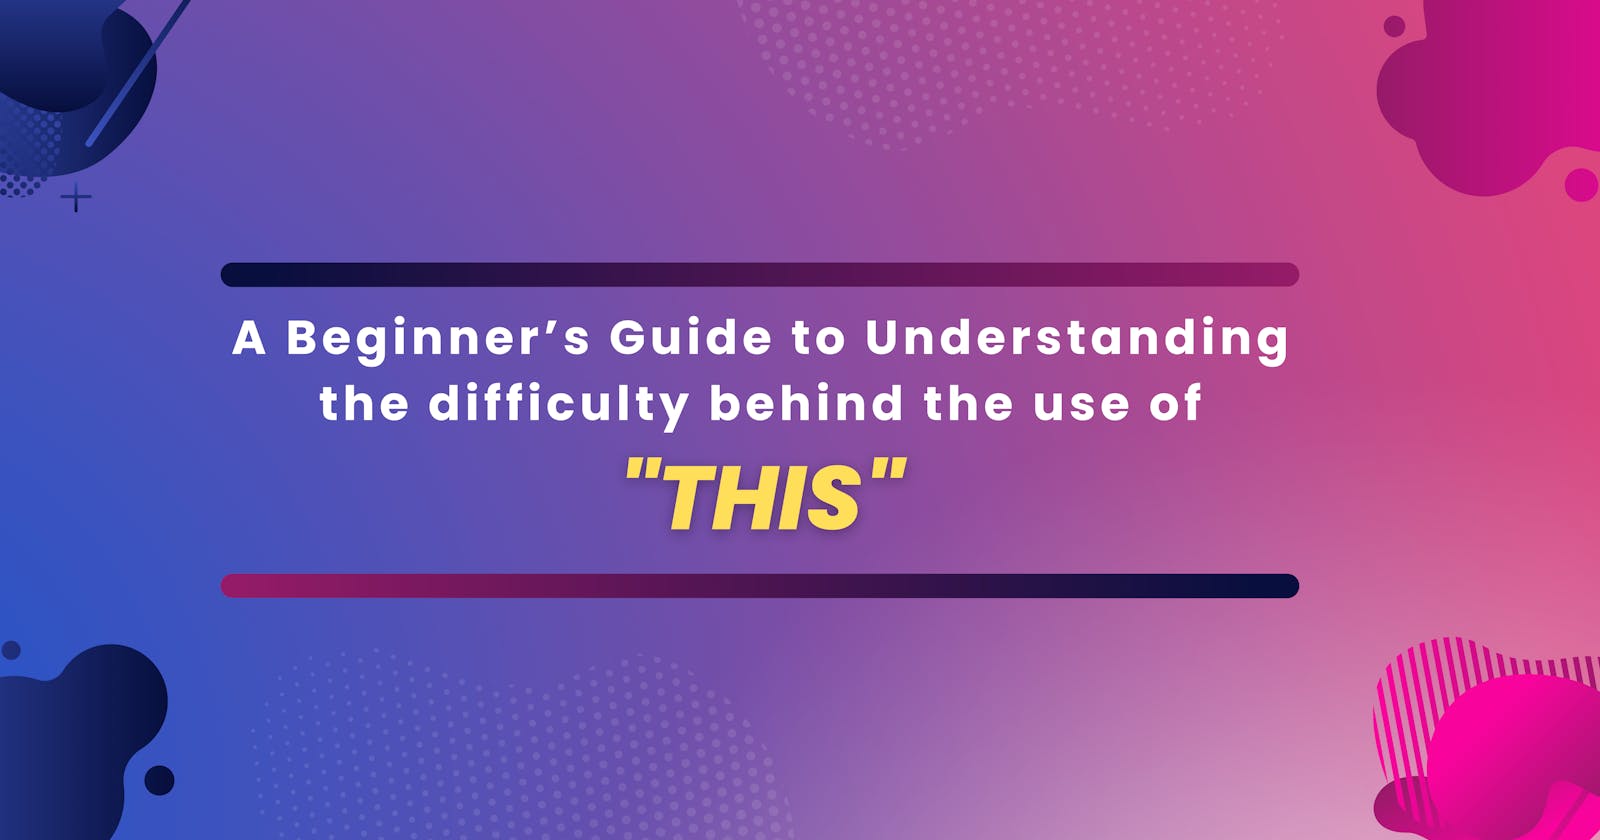 A Beginner’s Guide to Understanding the  difficulty behind the use of "this"